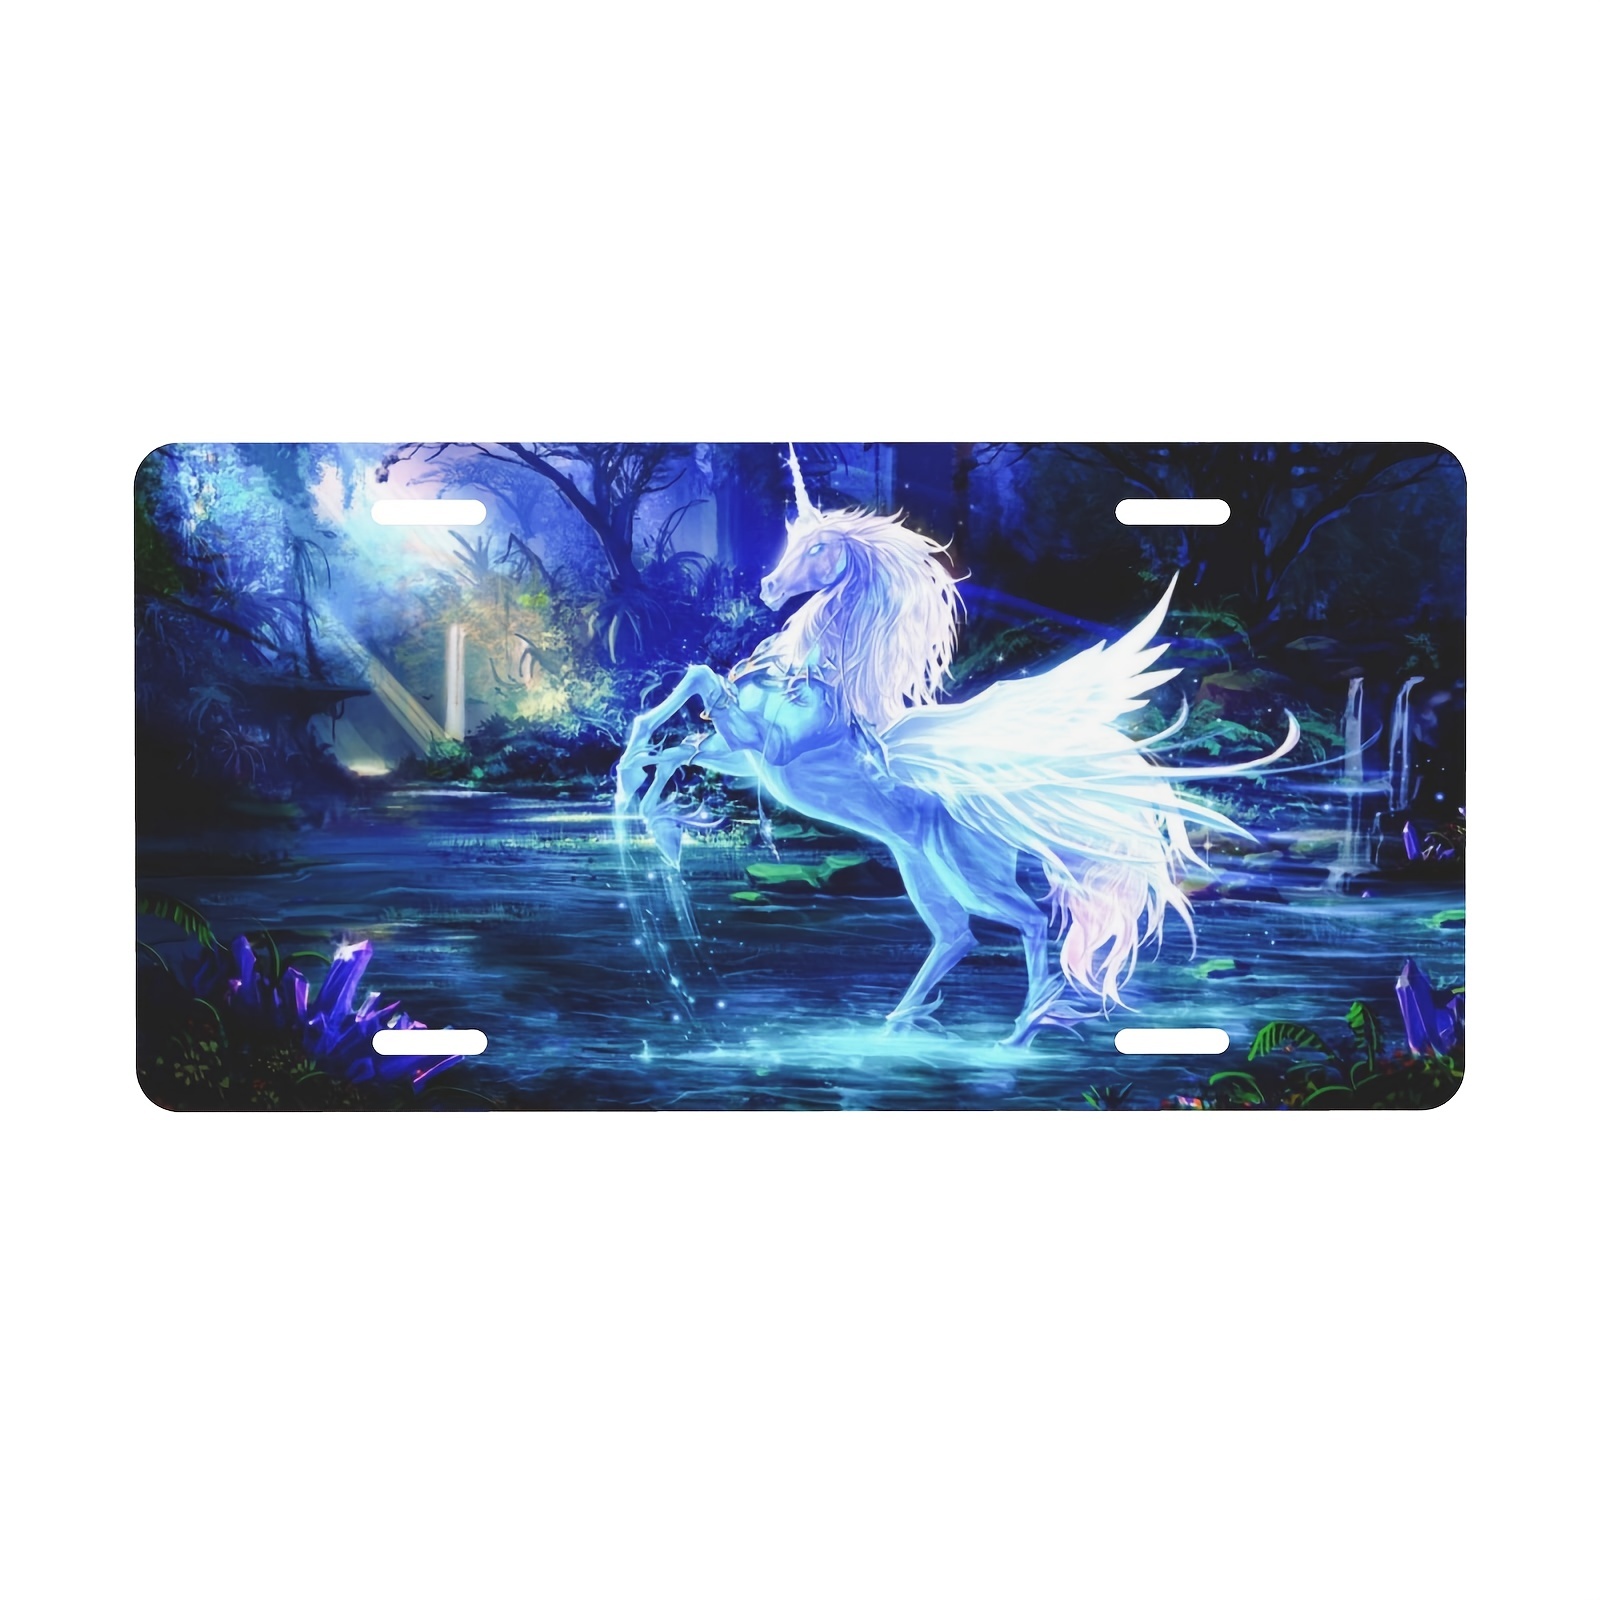 1PC License Plate Crystal Unicorn Novelty Decorative Car Front License Plate Metal Car Plate Aluminum Novelty License Plate 6x12inch